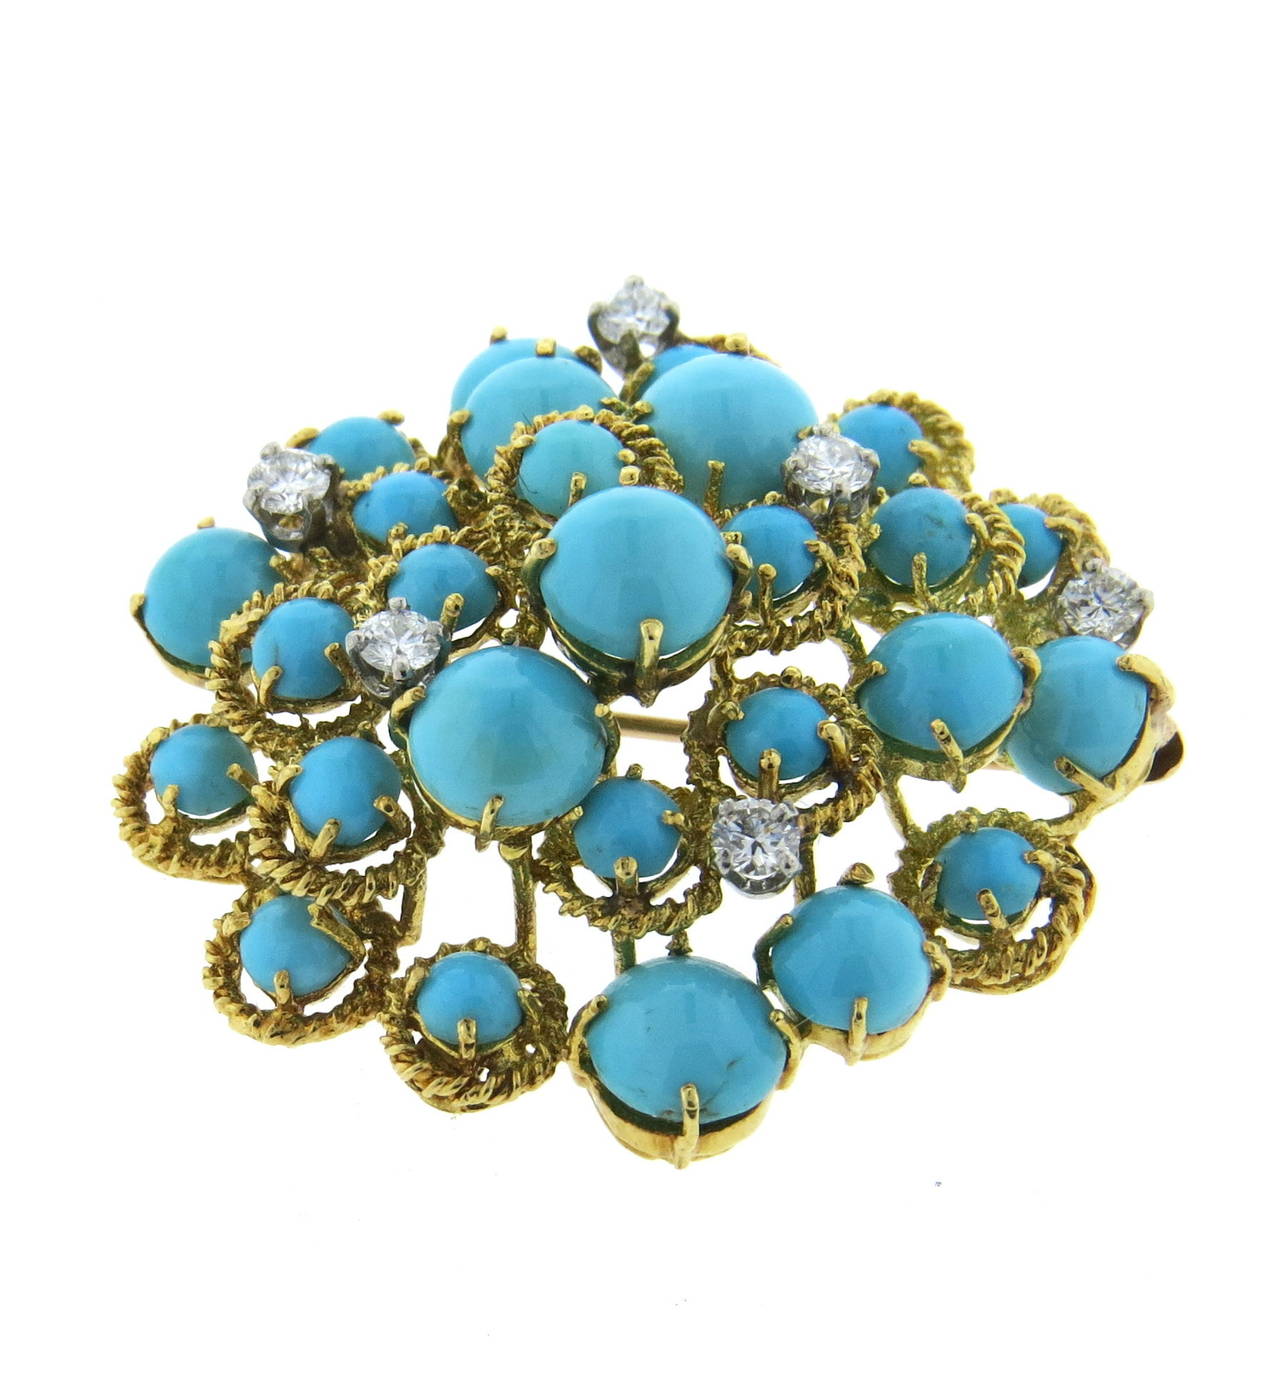 1970s brooch, set with approximately 0.50ctw in diamonds and turquoise in 18k gold.  Measures 39mm x 38mm. Weight - 16.9gr